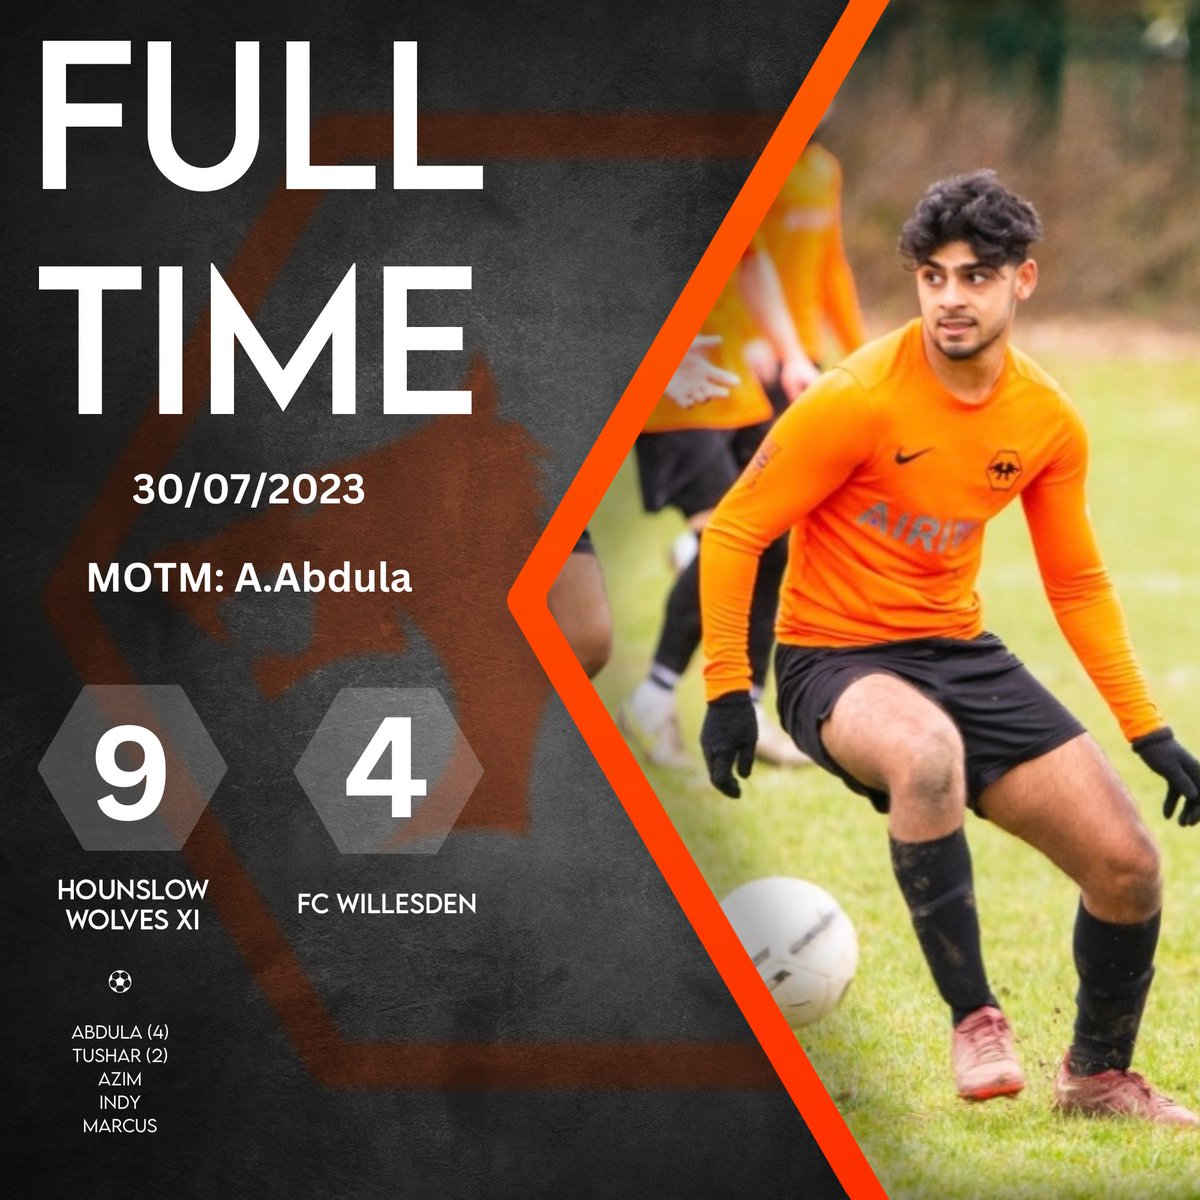 Back with a 💥 

A superb performance from both teams in our first pre-season fixtures of the season 🔥 

Special mentions to Omar and A.Abdula ❗️

We go again 🐺🧡

#grassrootfootball #hounslow #sundayleaguefootball